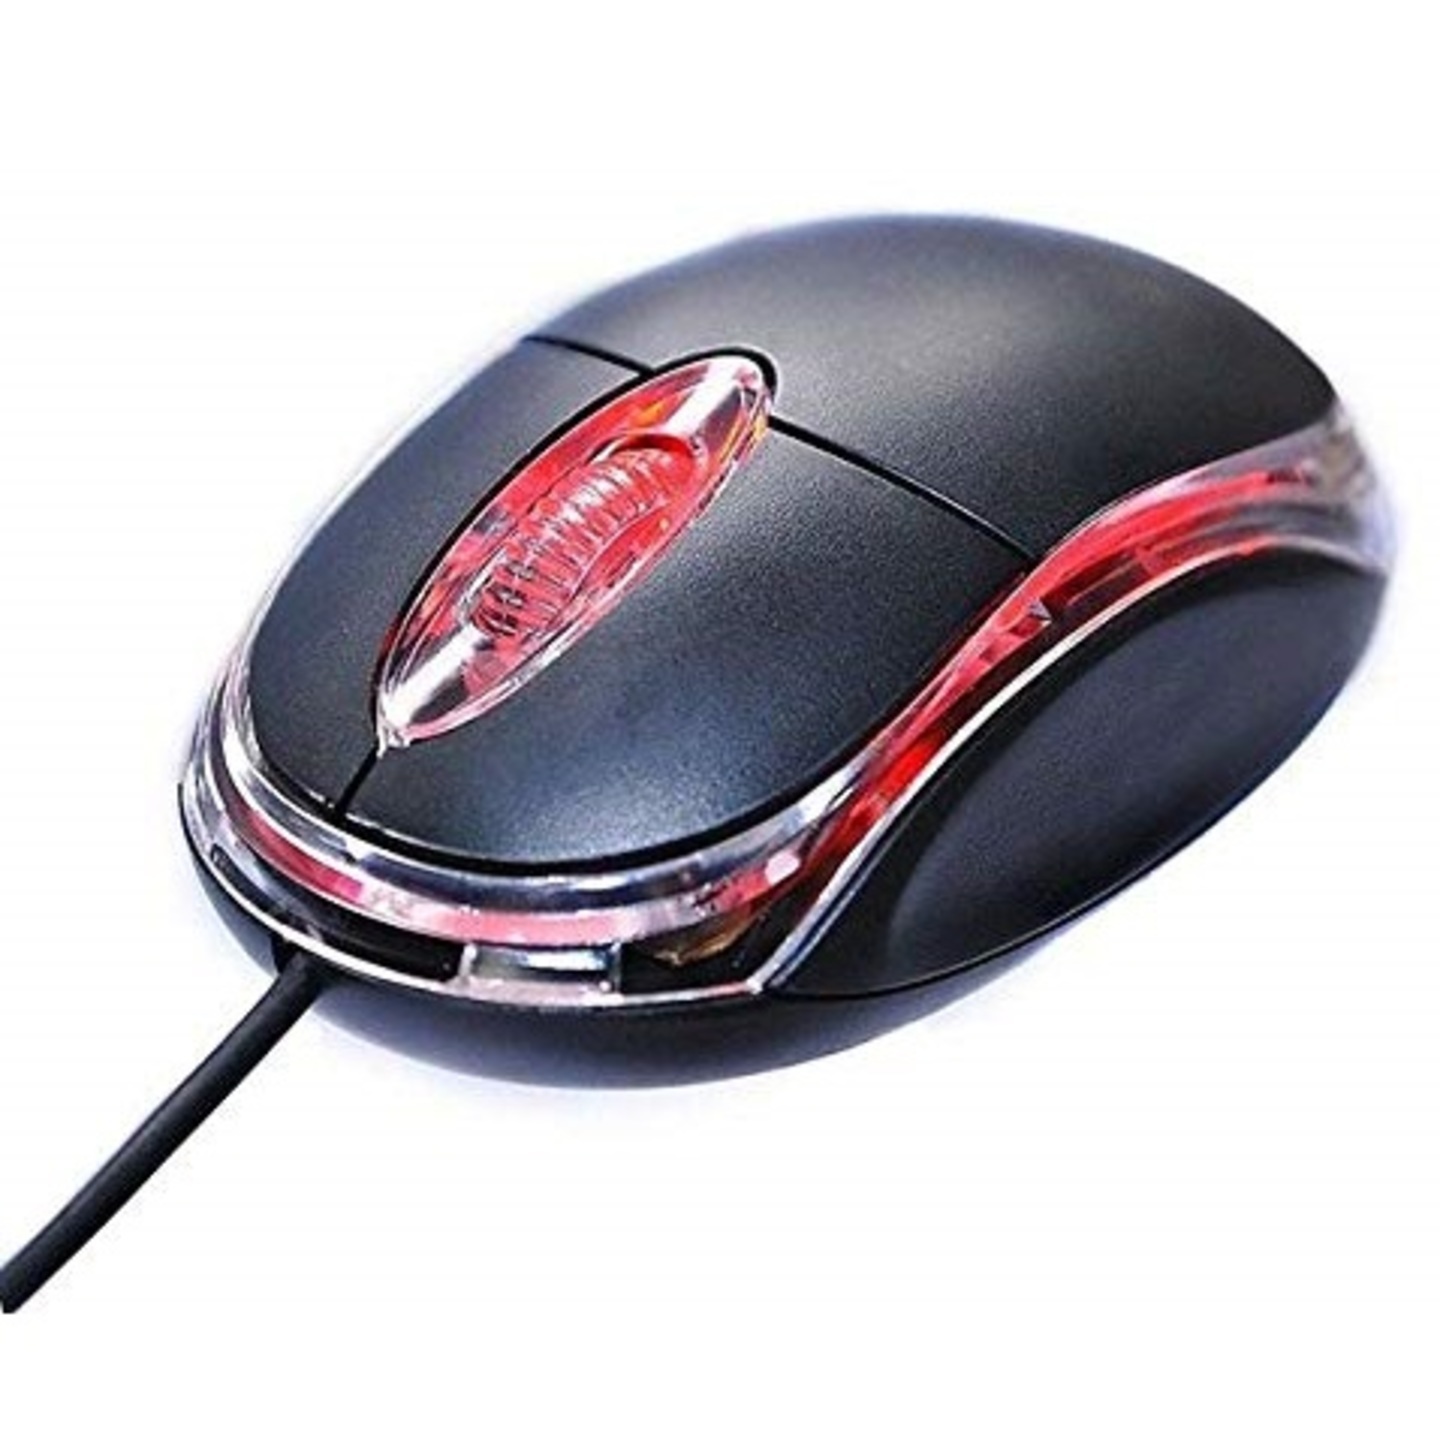 PremiumAV Terabyte 3D Optical Wired Mouse with LED Lights